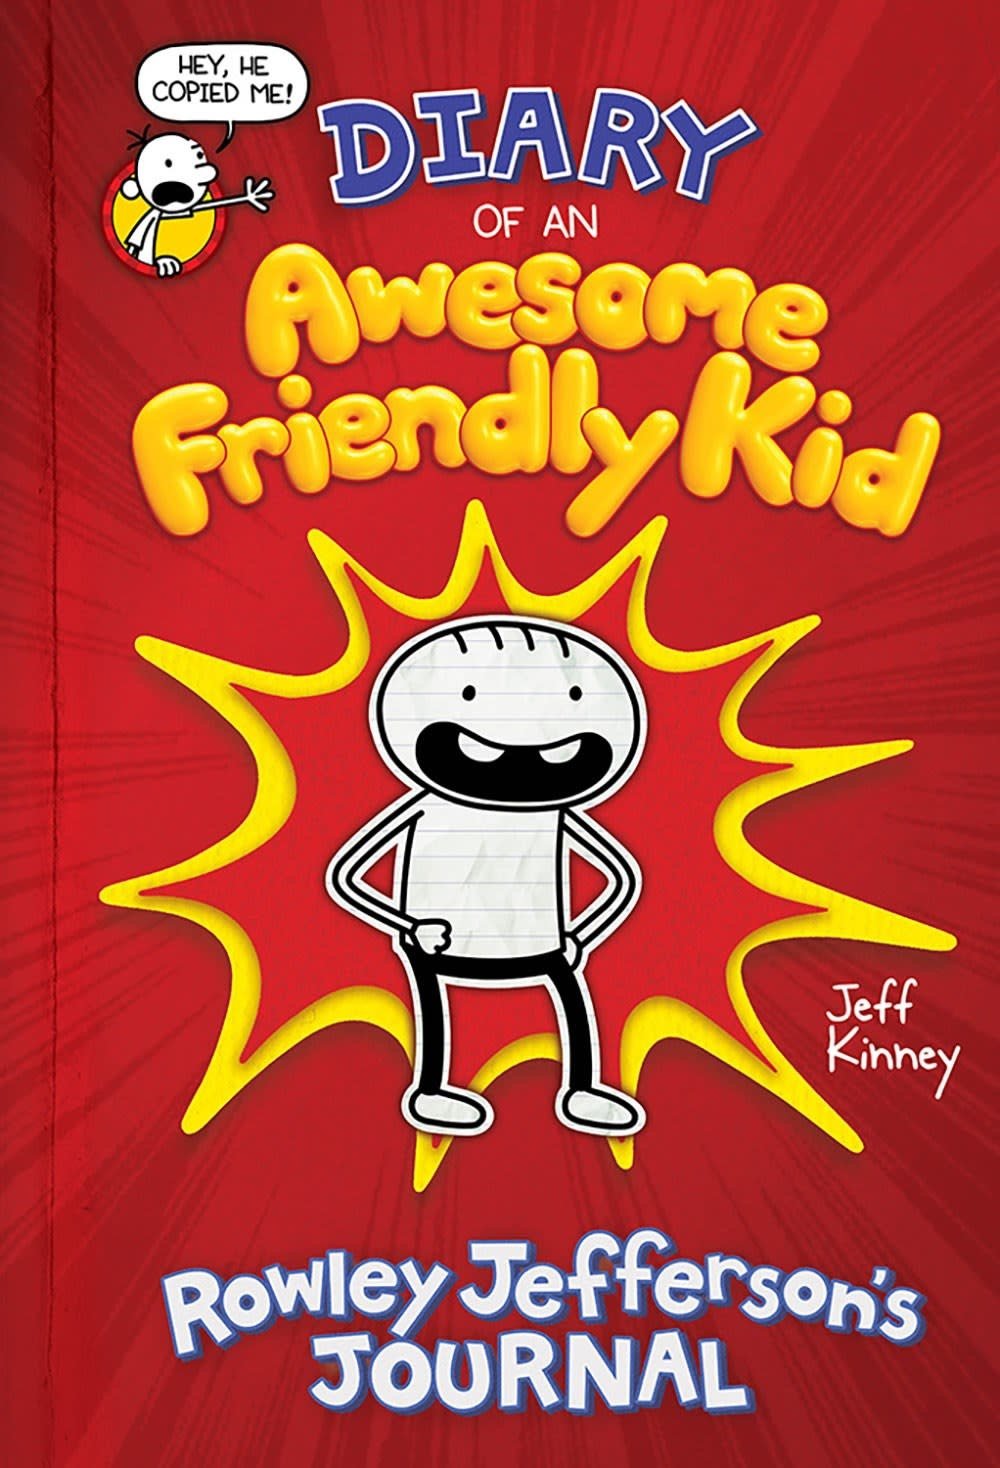 Amulet Books Diary of an Awesome Friendly Kid (Wimpy Kid)